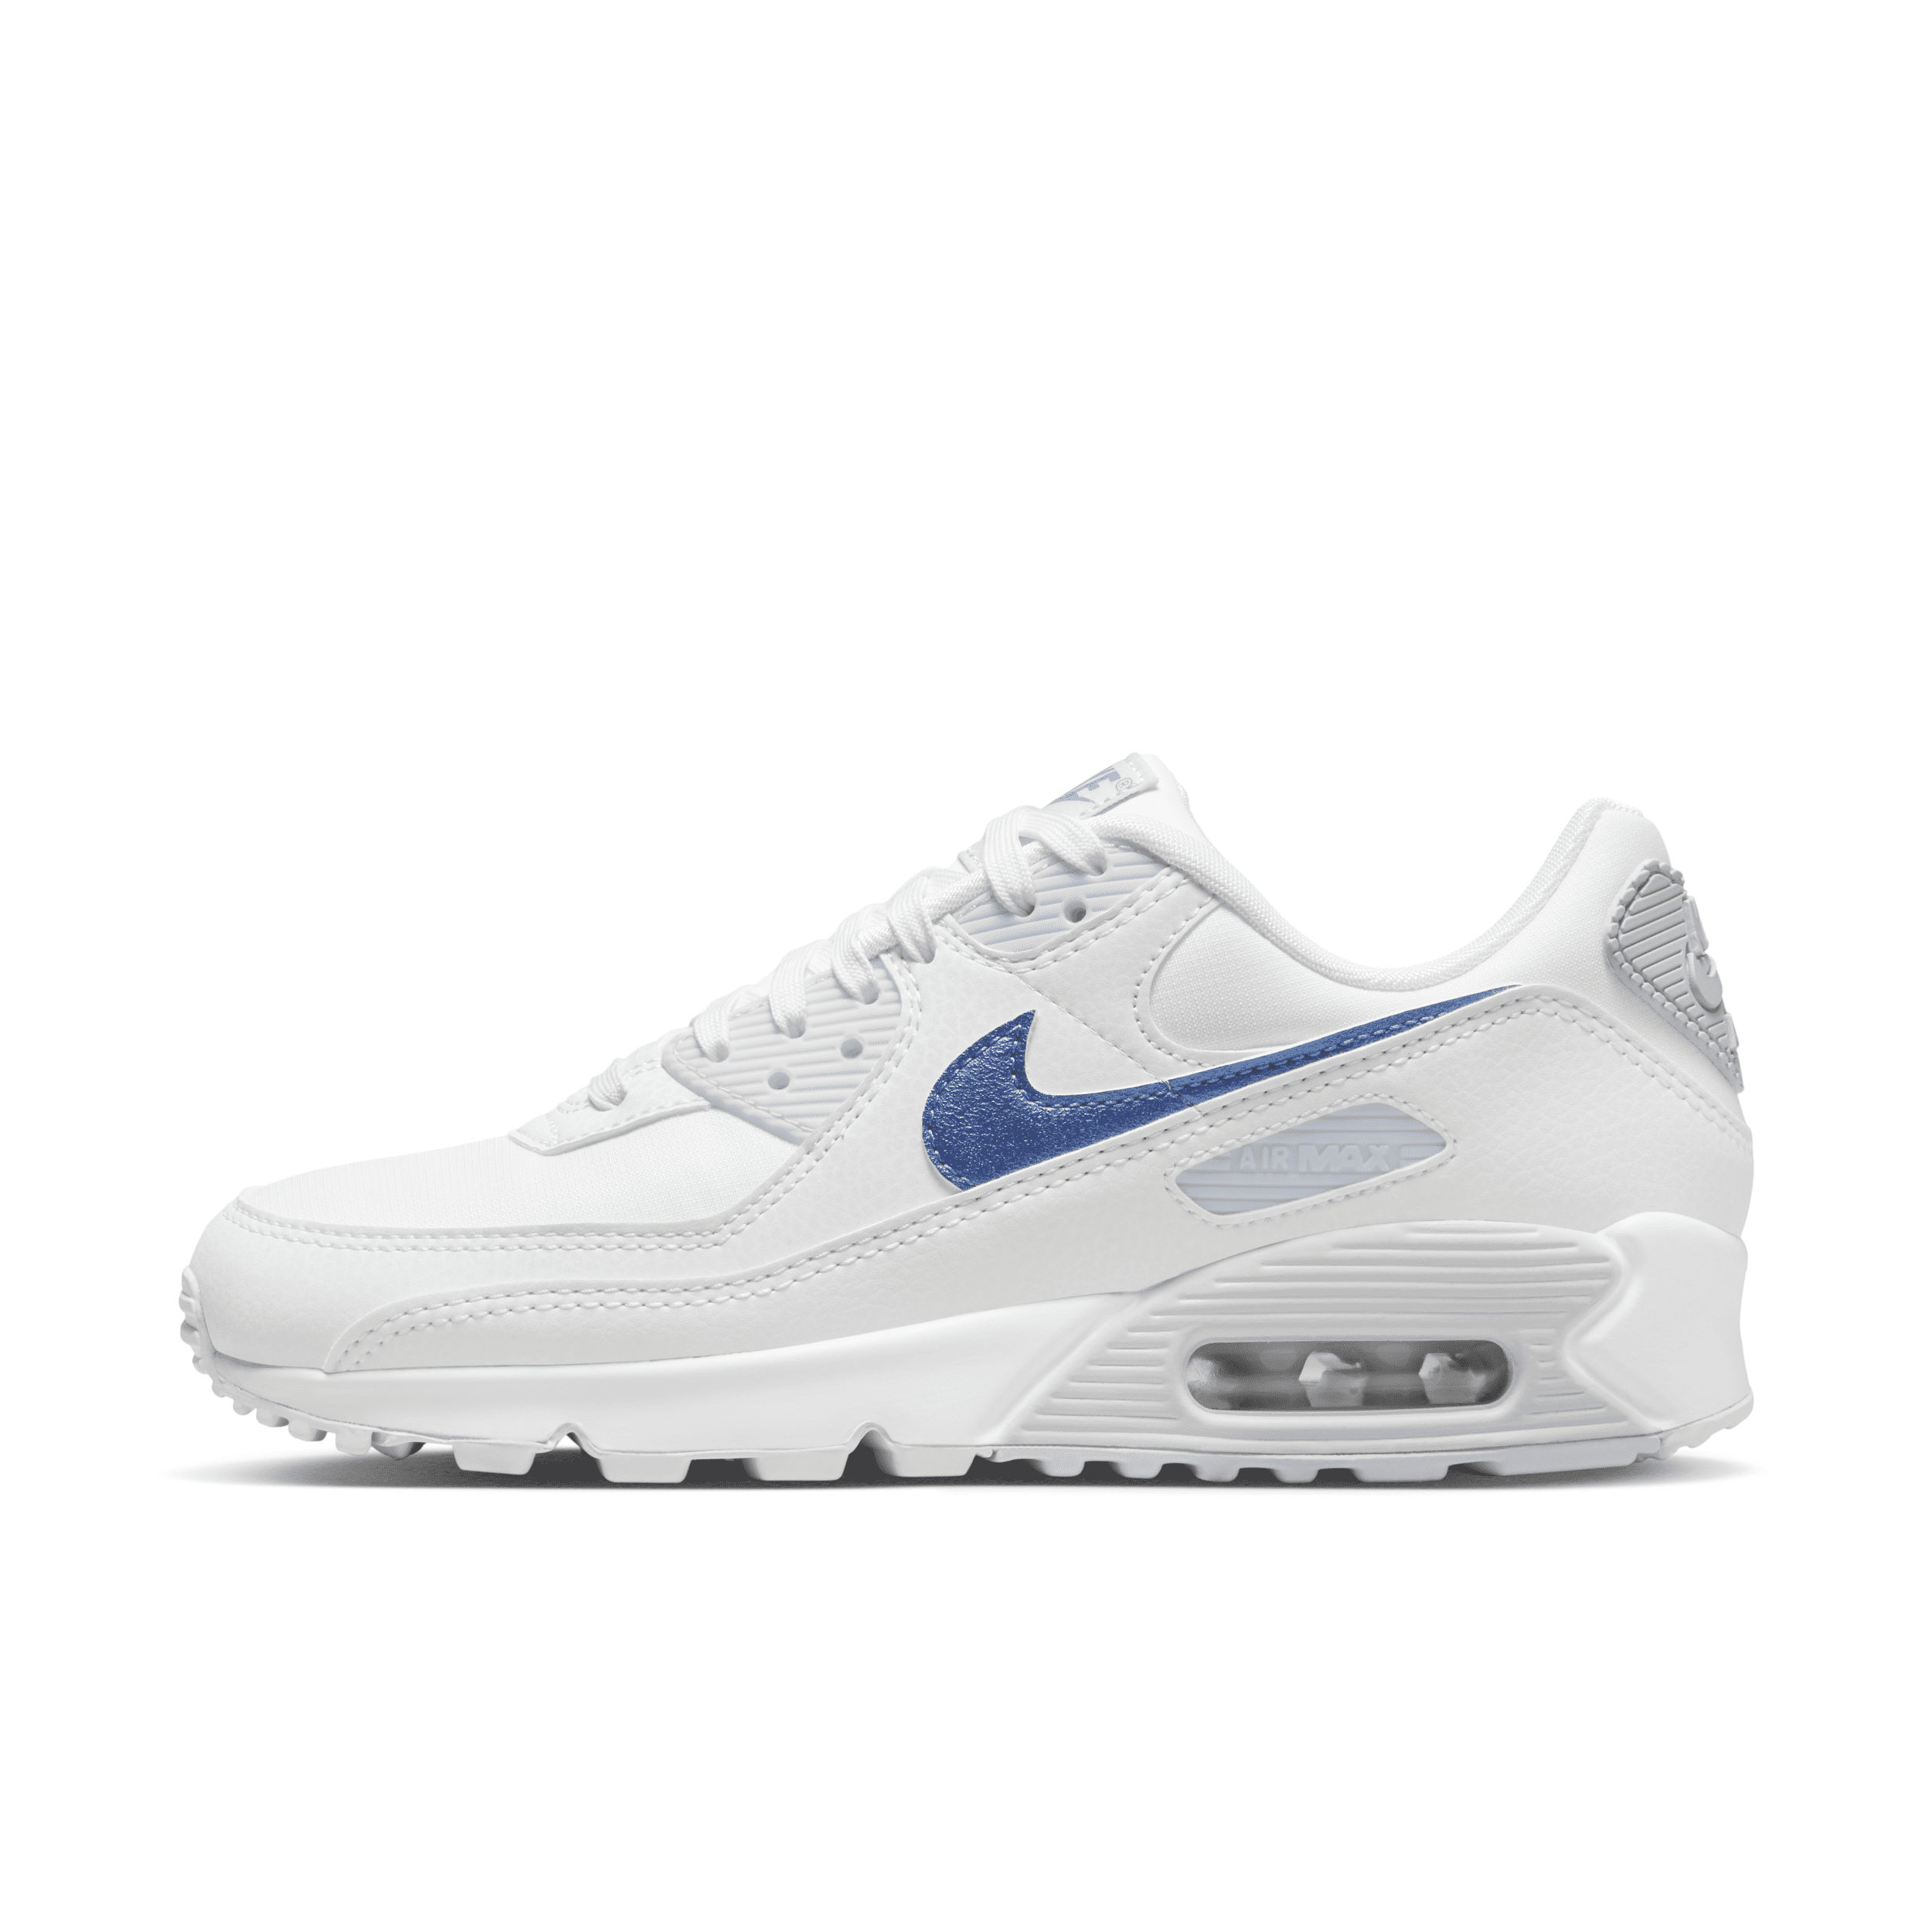 Nike Women's Air Max 90 Shoes in White, Size: 10.5 | DX0115-100